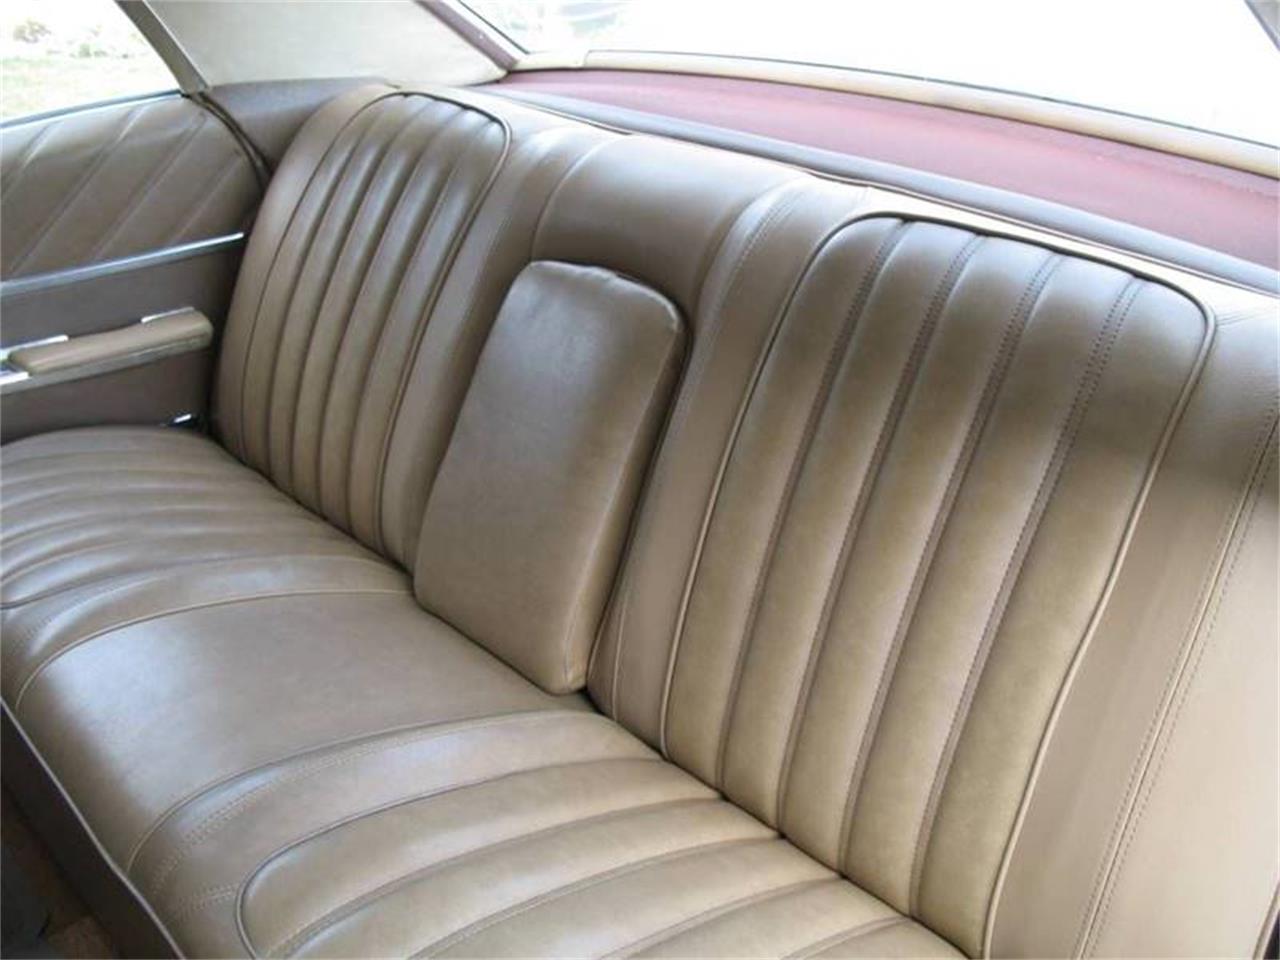 1965 Buick Wildcat for sale in Long Island, NY – photo 11